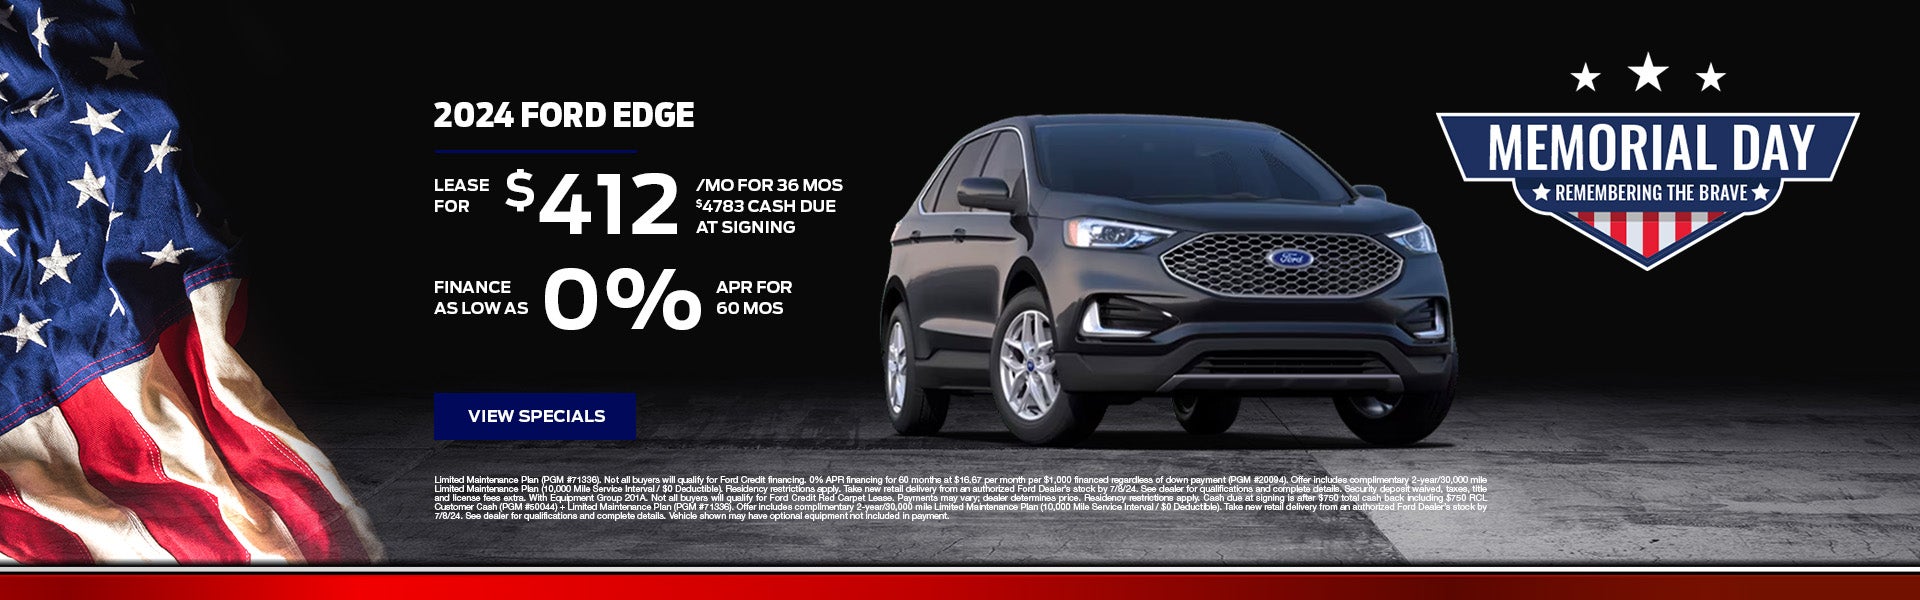 2024 Ford Edge Special